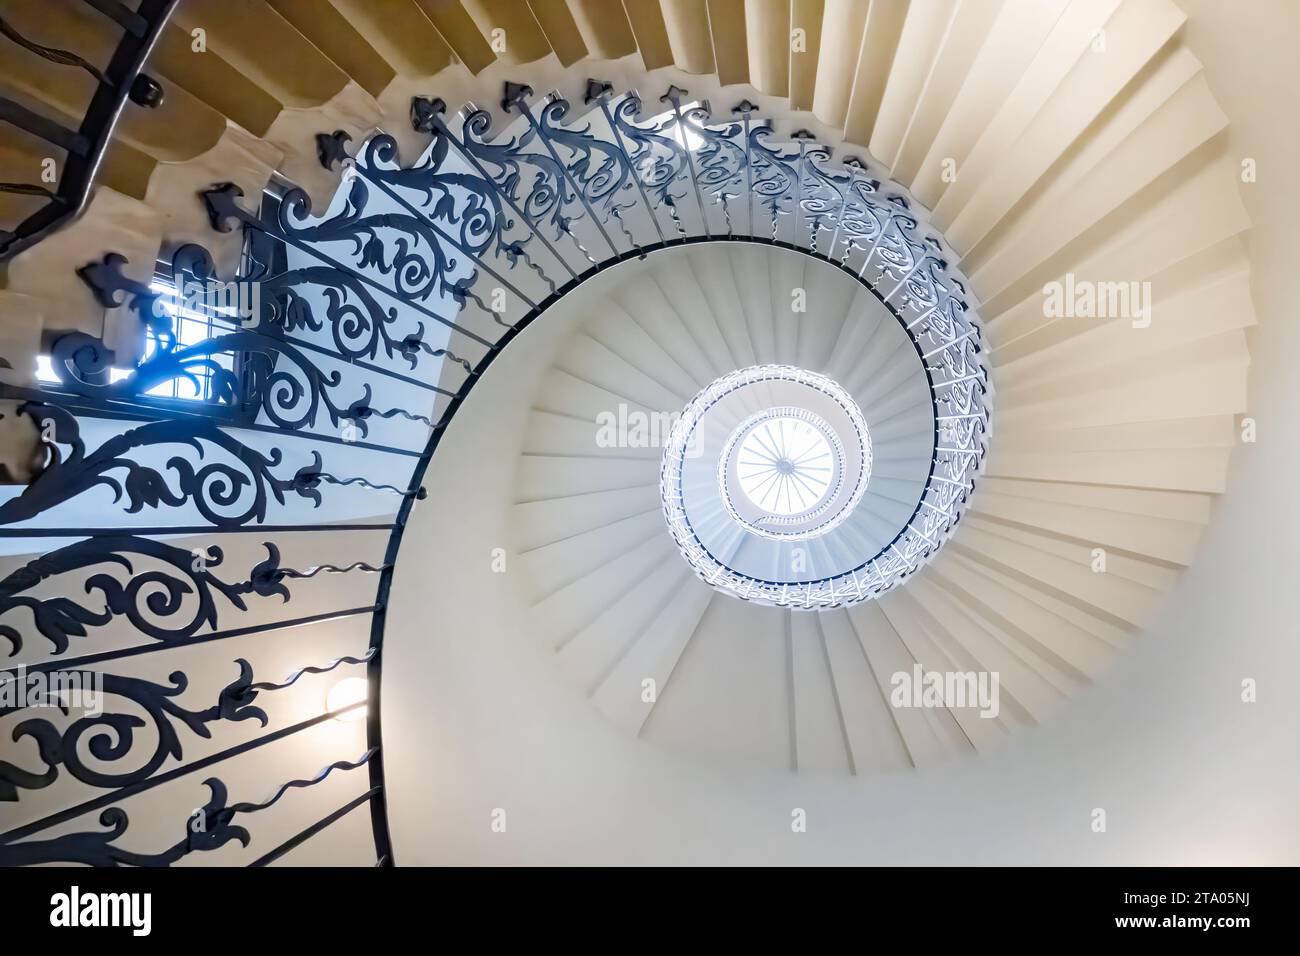 The Tulip Stairs located in The Queen's House London UK. The tulip design in the wrought iron bannisters give the self supporting stair its name Stock Photo